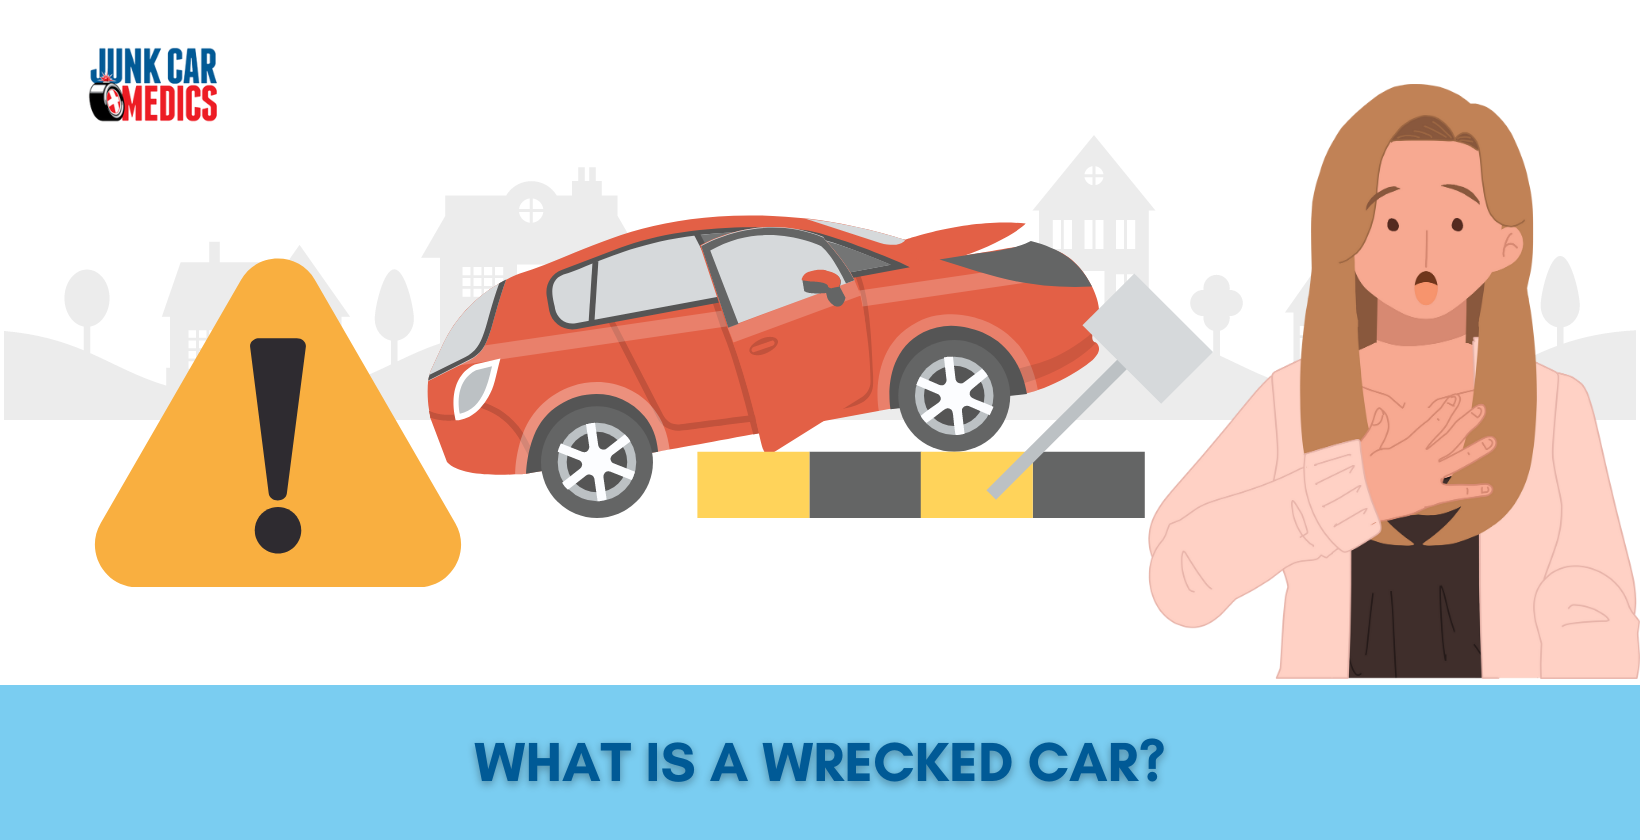 What is a Wrecked Car?